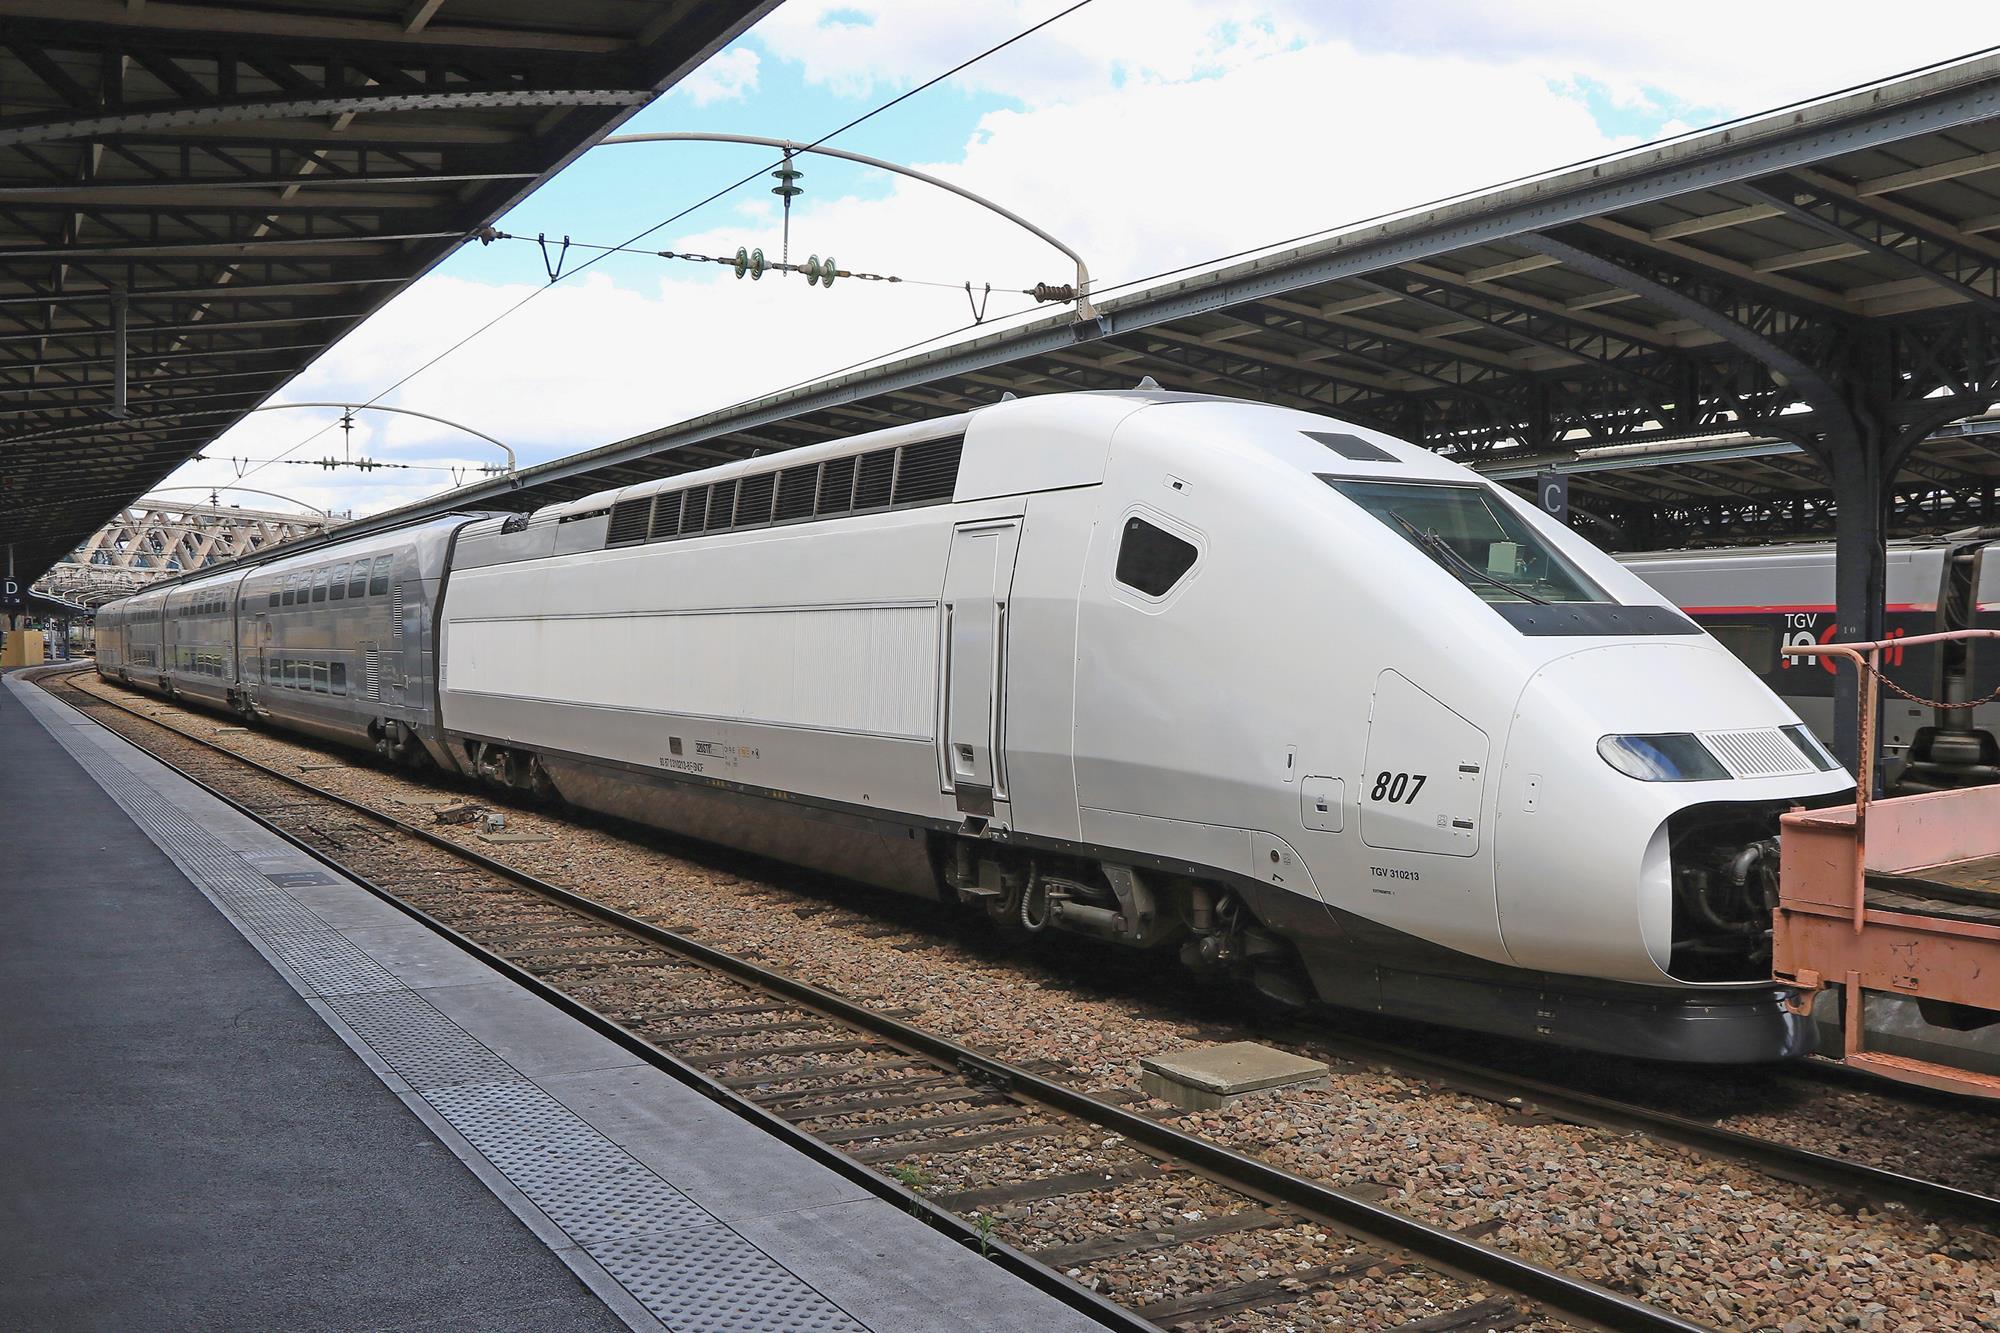 First Trainset For Rielsfera Low Cost High Speed Rail Services Heads To Spain News Railway Gazette International